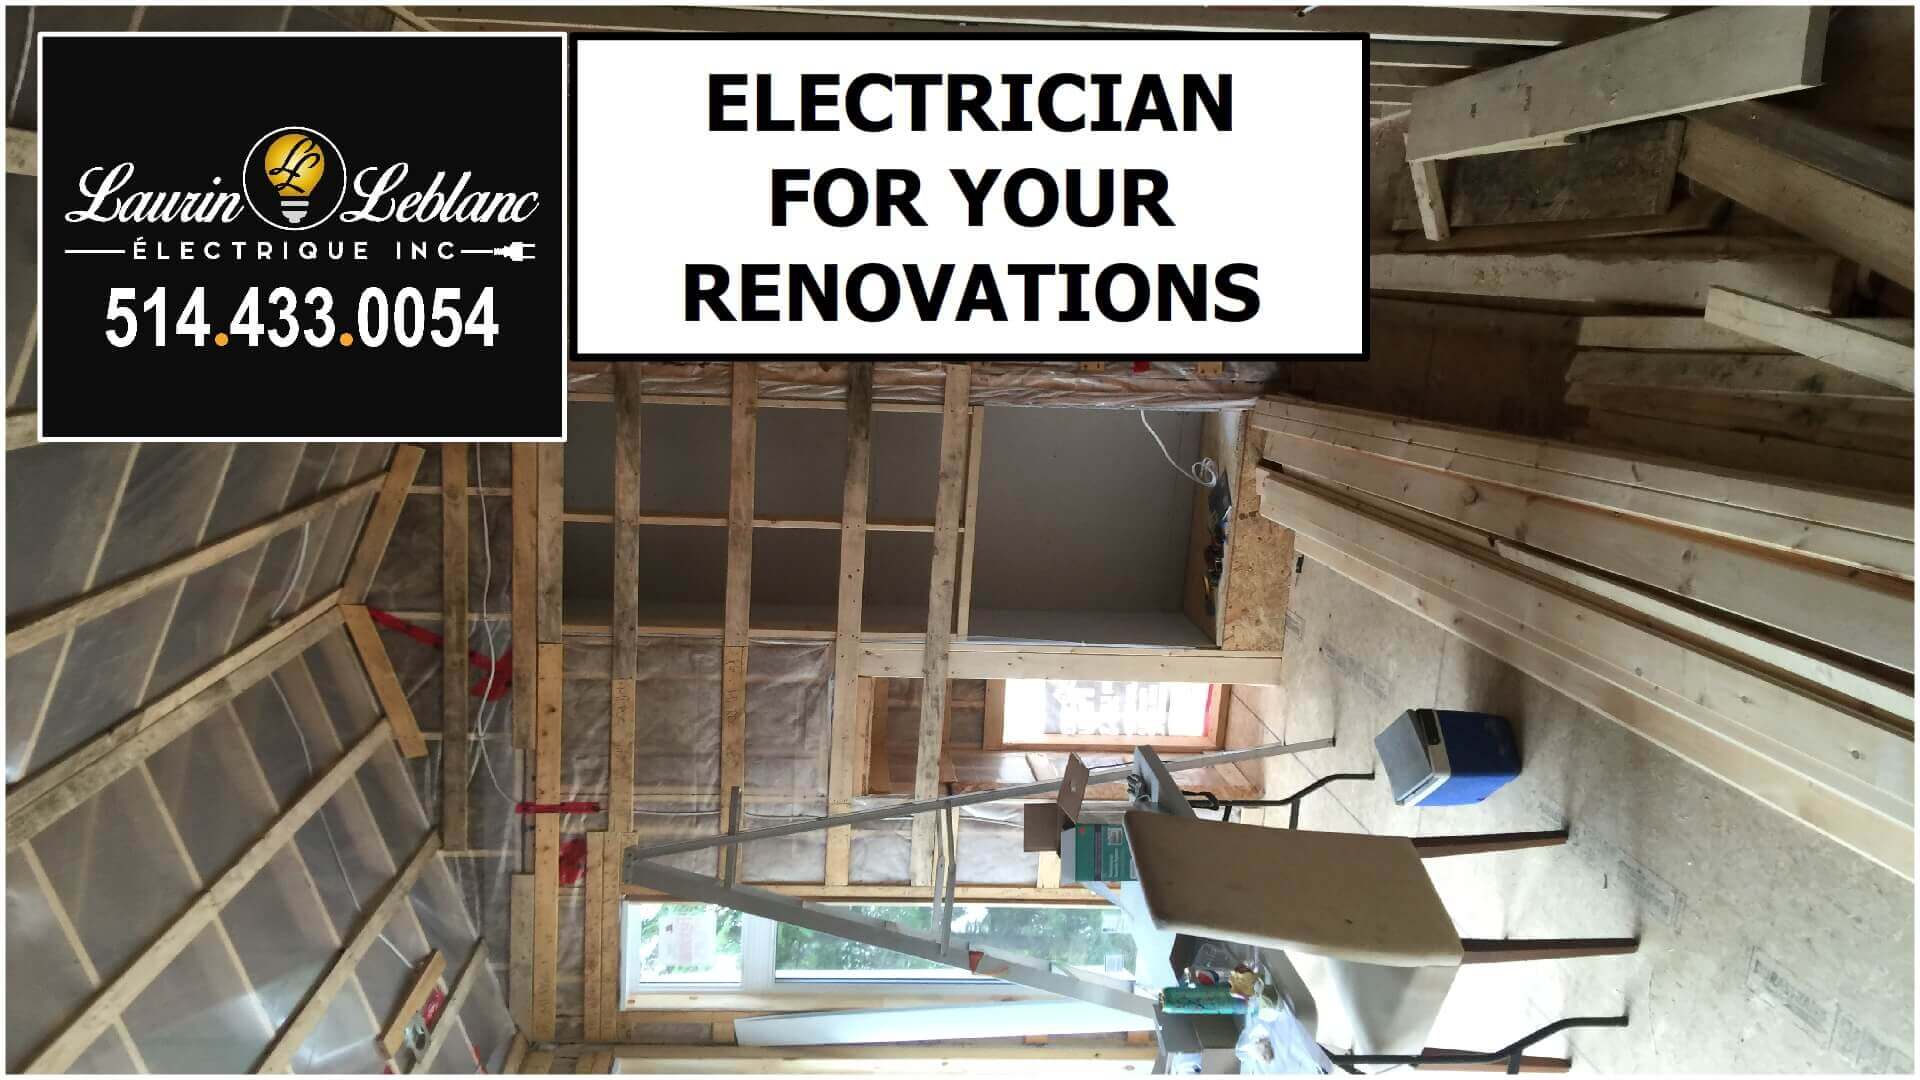 Electrician Renovations in Pointe Claire